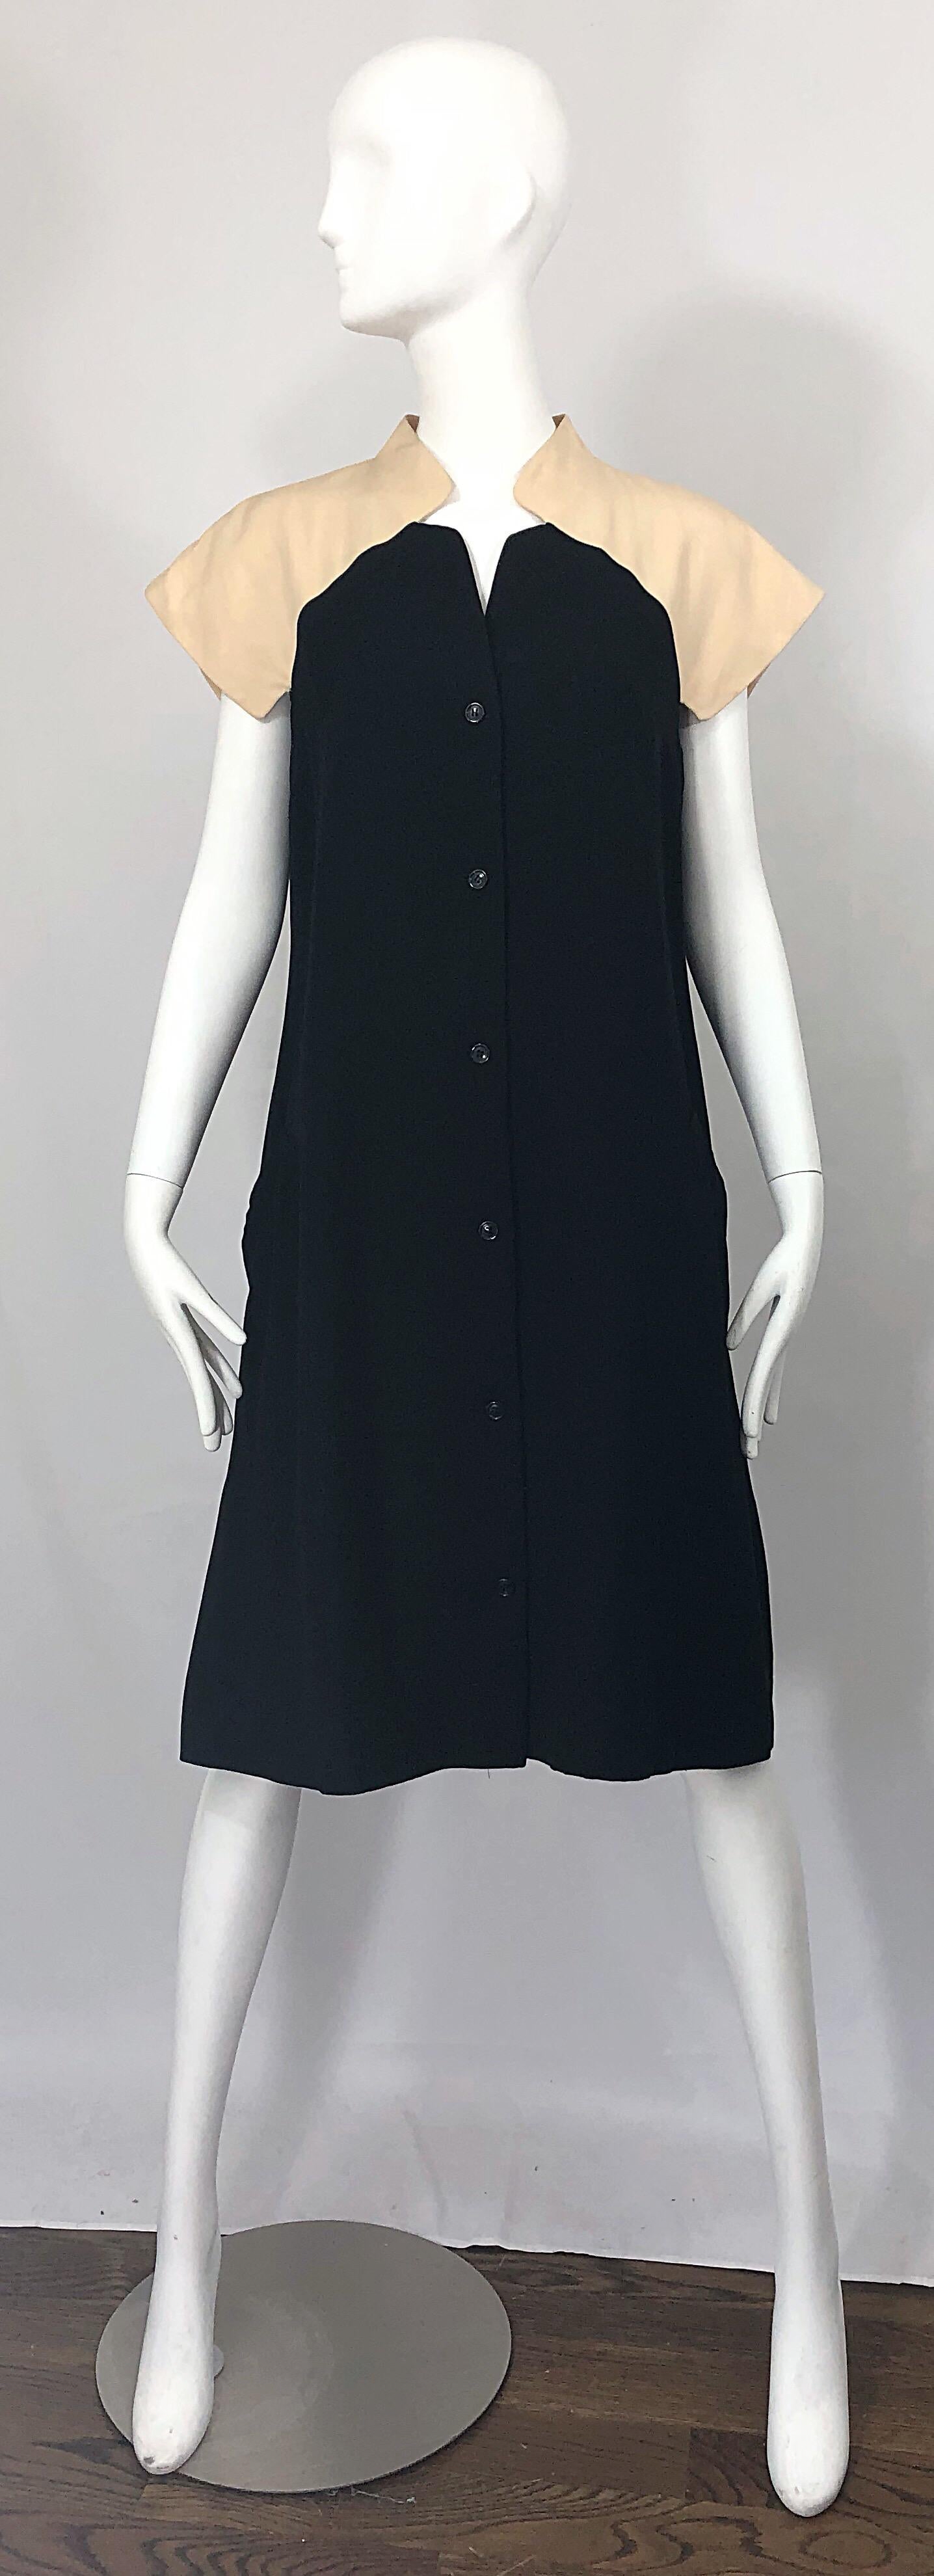 Vintage Halston 1970s Optical Illusion Black + Khaki 70s Trapeze Dress In Excellent Condition For Sale In San Diego, CA